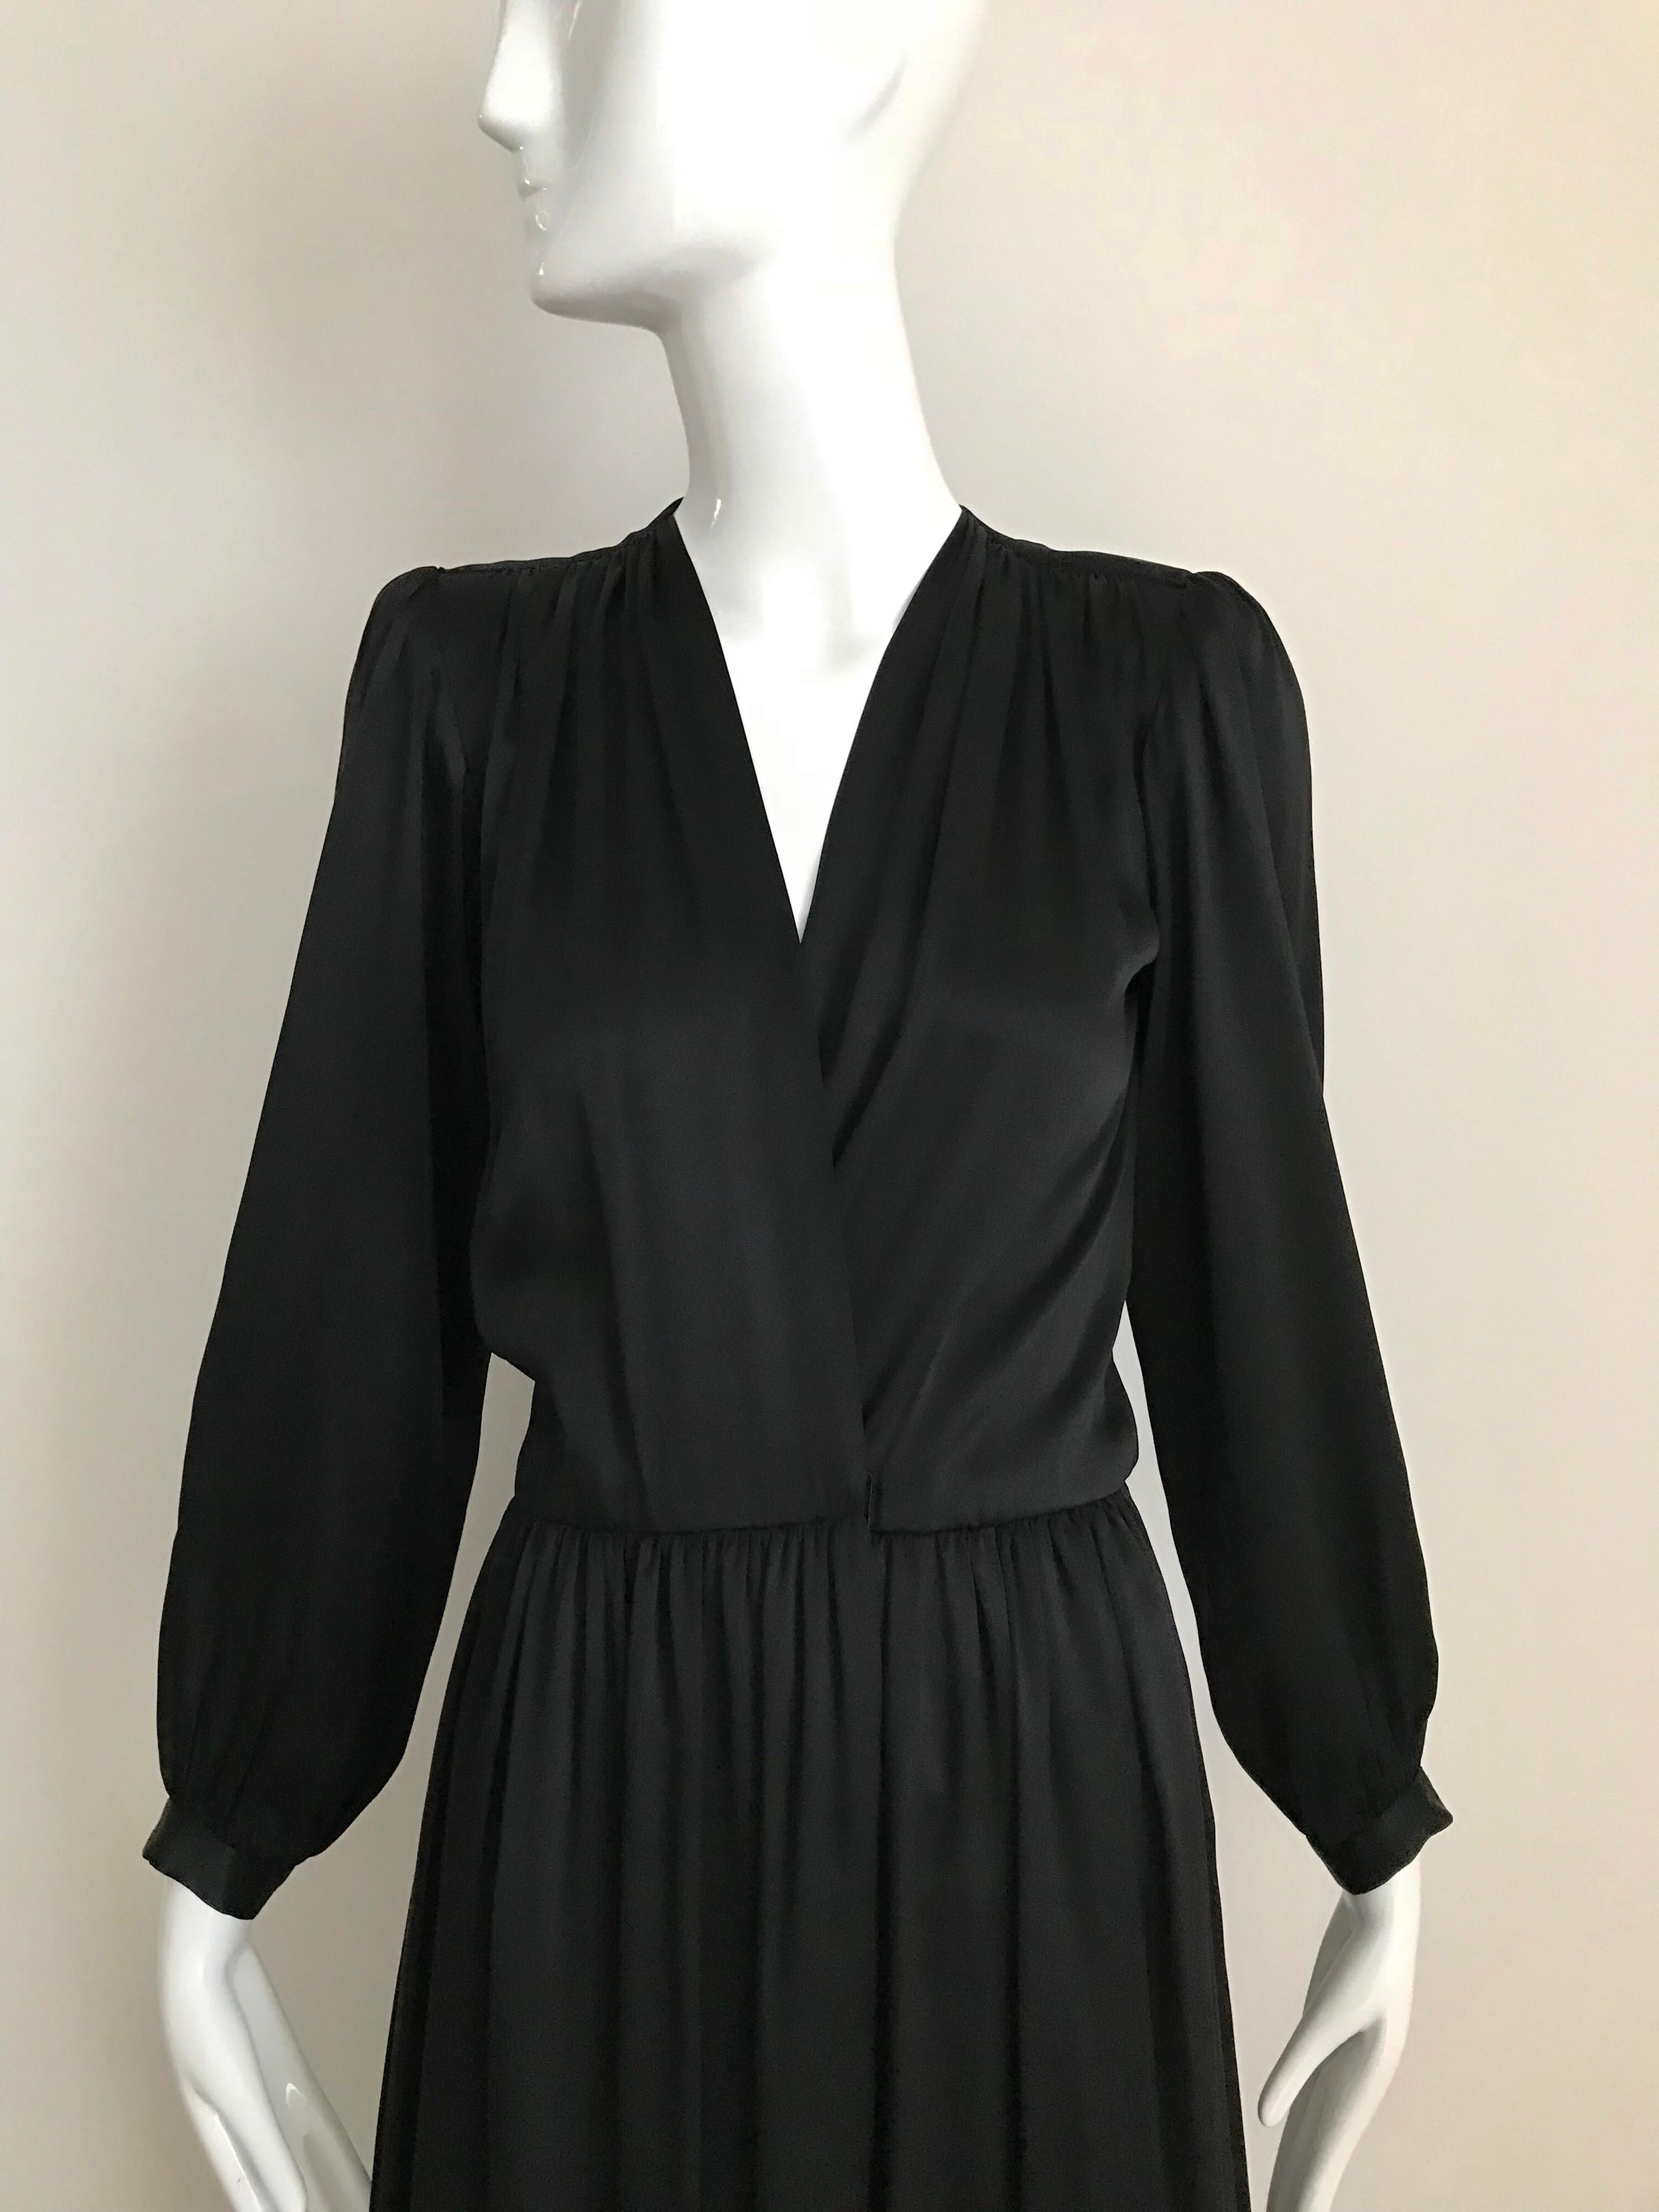 Elegant and classic 1970s Saint Laurent by Yves Saint Laurent Satin Charmeuse long sleeve V neck wrap cocktail  dress.  
Size:  Small. Label marked size: 34
Bust: 36 inches/ Waist: 27 inches/ Dress length: 56 inches